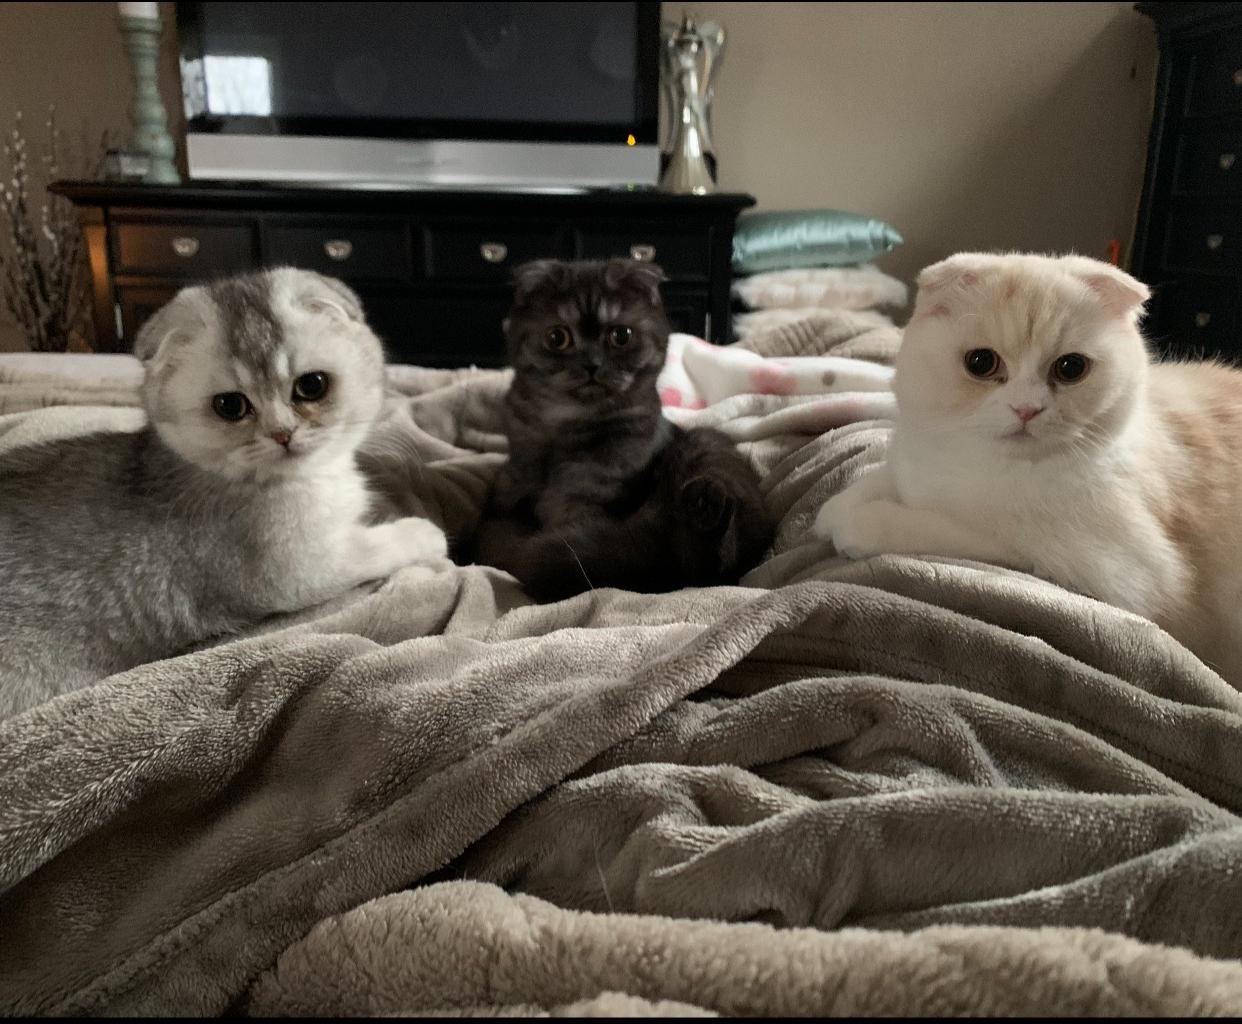 Cats on a bed